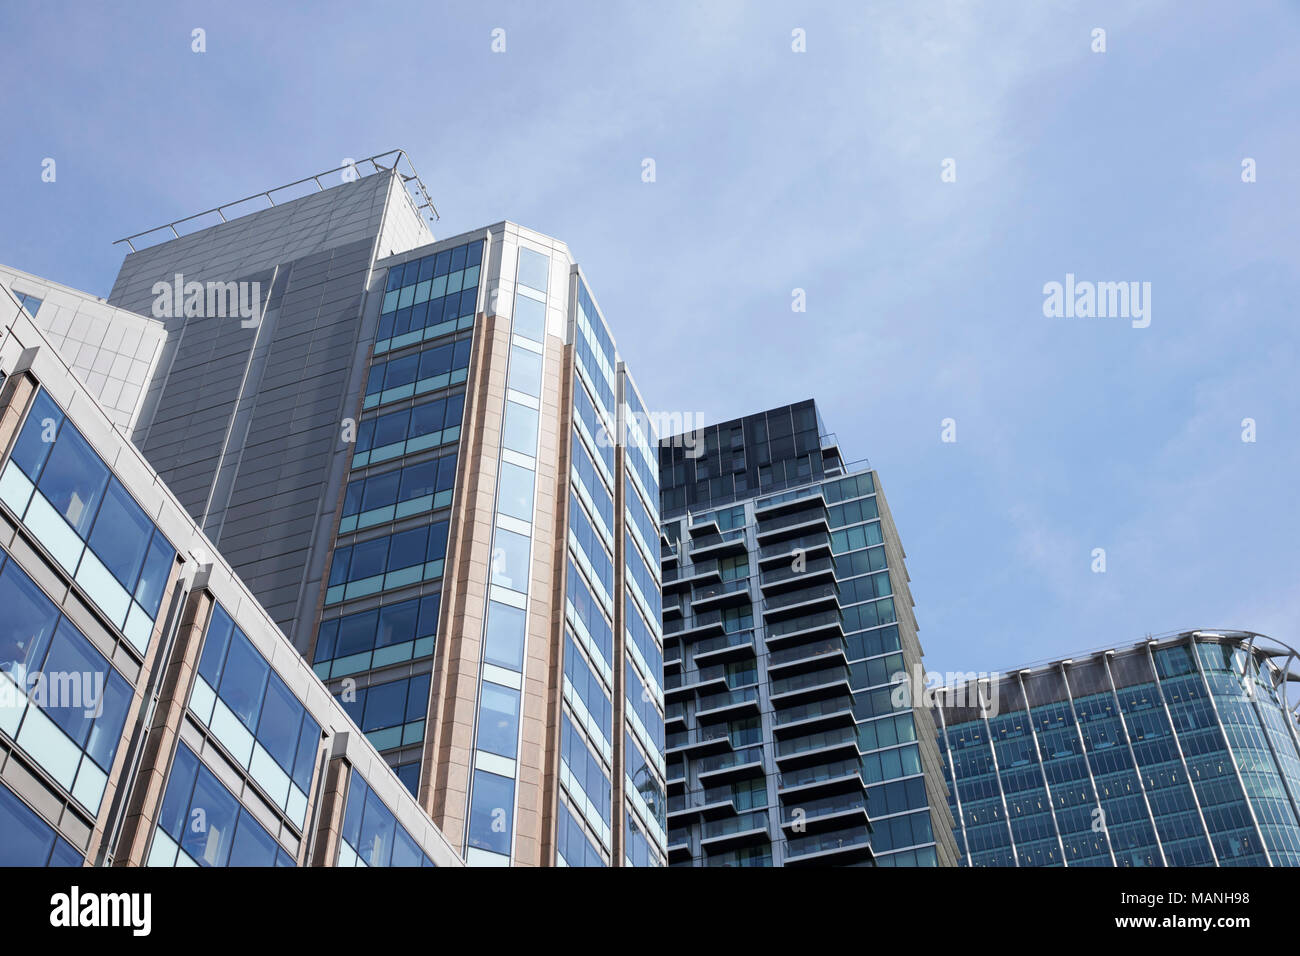 LONDON - MAY, 2017: Low angle view of modern glass fronted buildings against blue sky, City Of London, London Stock Photo